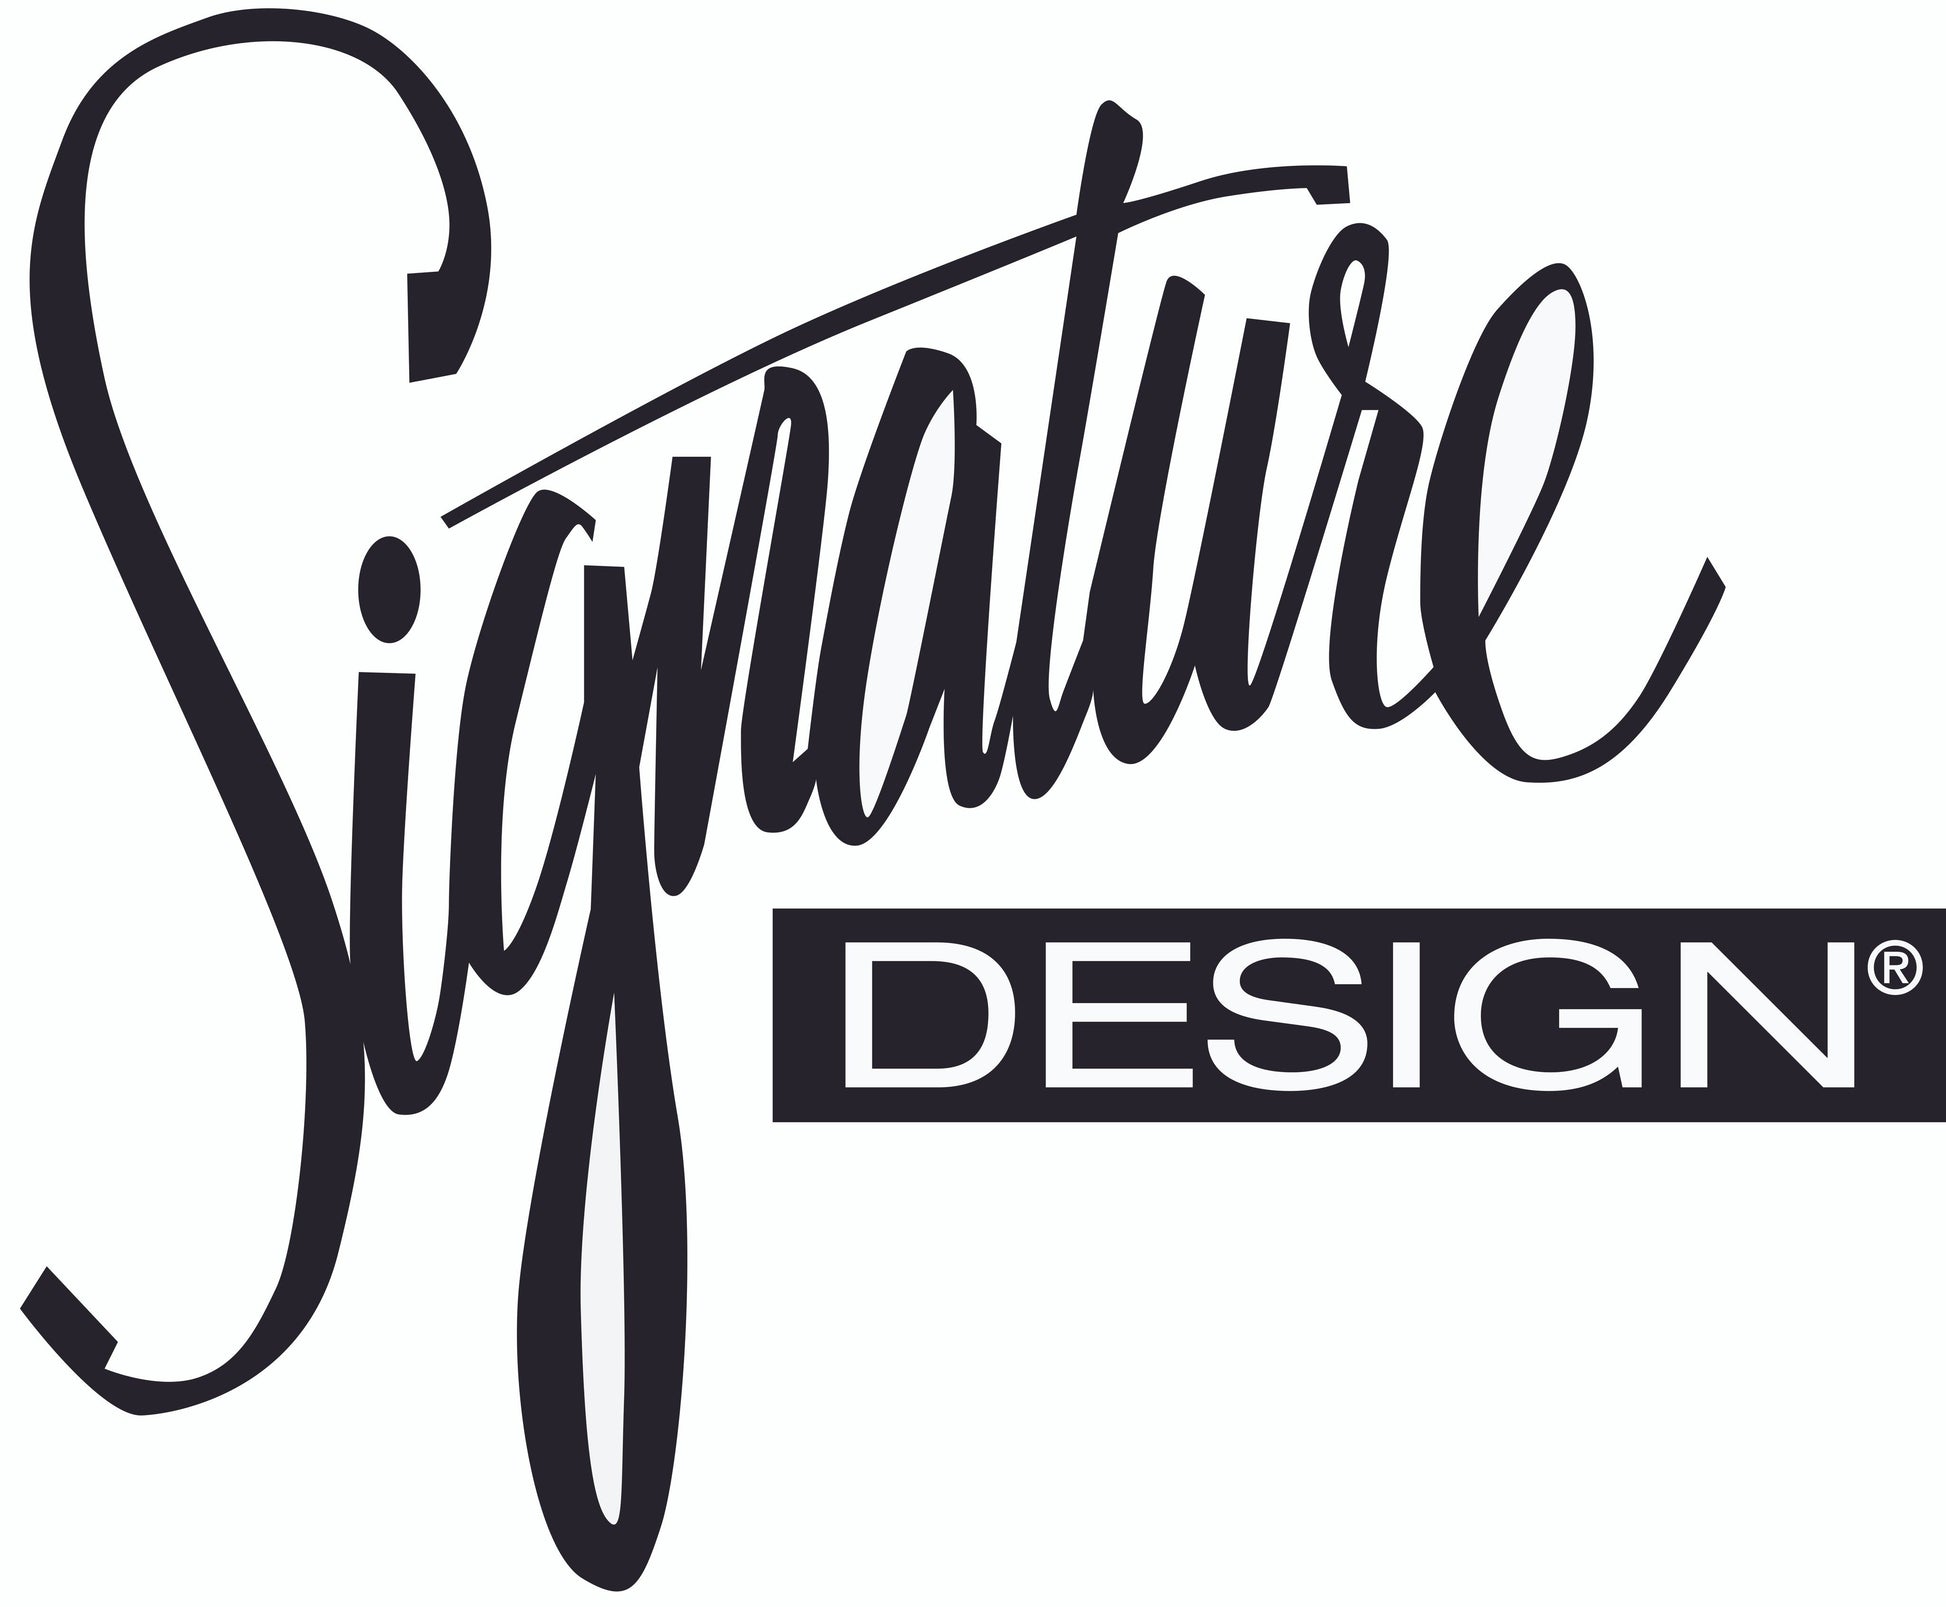 Ralene RECT DRM Counter EXT Table Signature Design by Ashley®